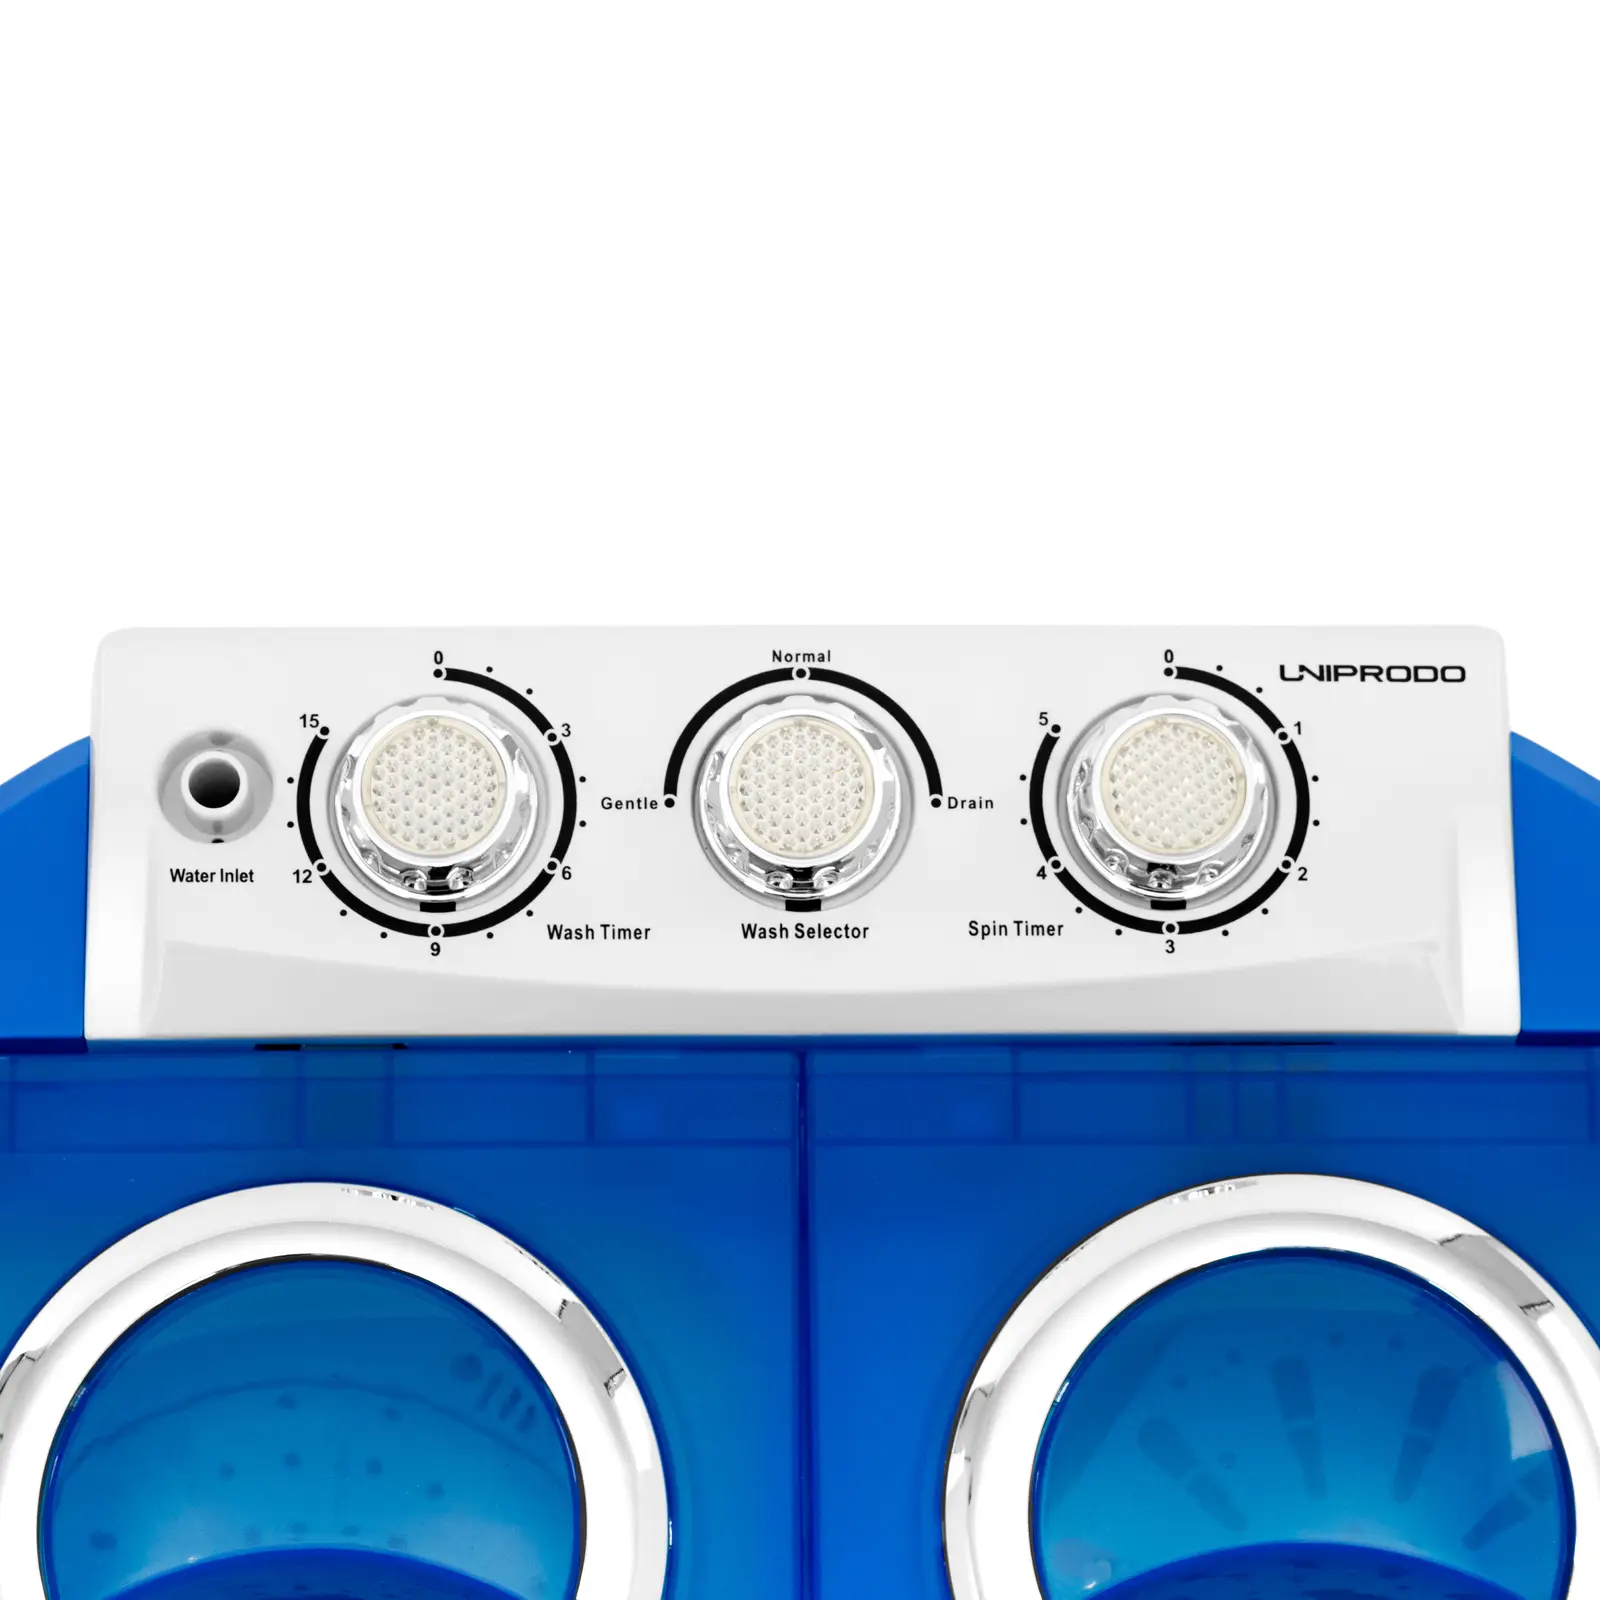 Mini Washing Machine - with spin function - 2 kg - 190/135 W